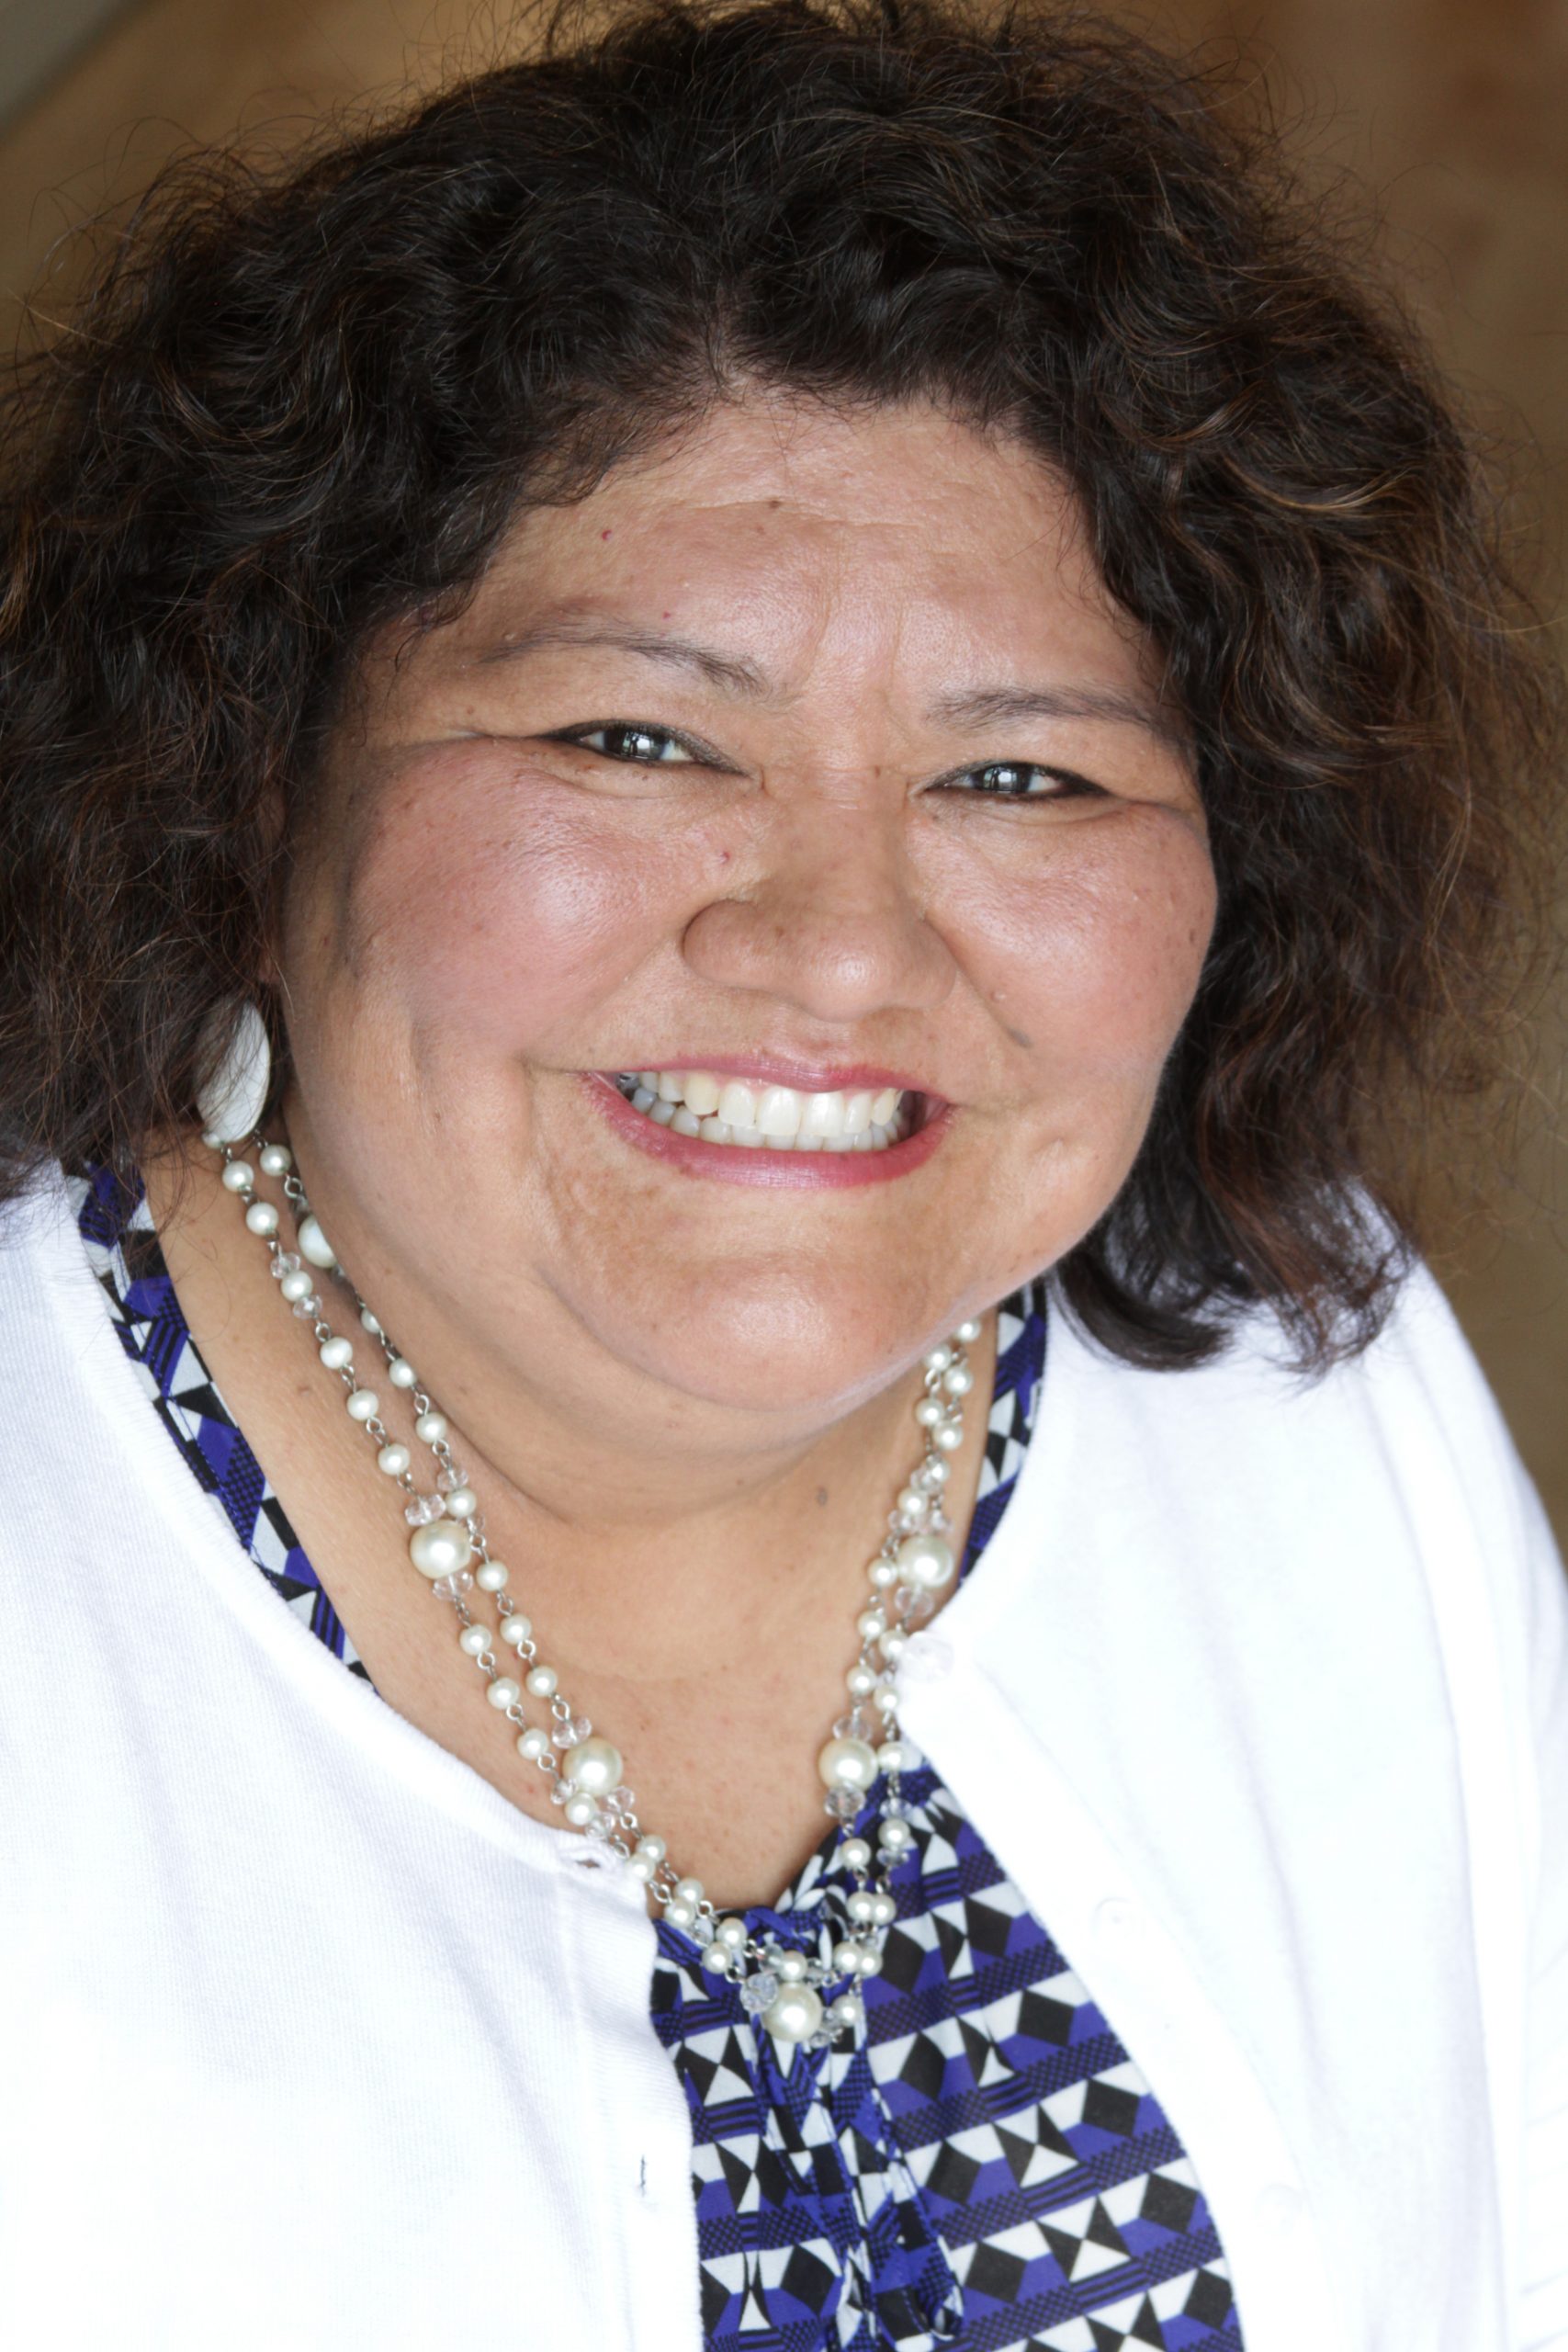 Tarajean Yazzie-Mintz is Co-Director of the Office of Research and Sponsored Programs and Senior Program Officer of Tribal College and Universities (TCUs) Early Childhood Education Initiatives at the American Indian College Fund.